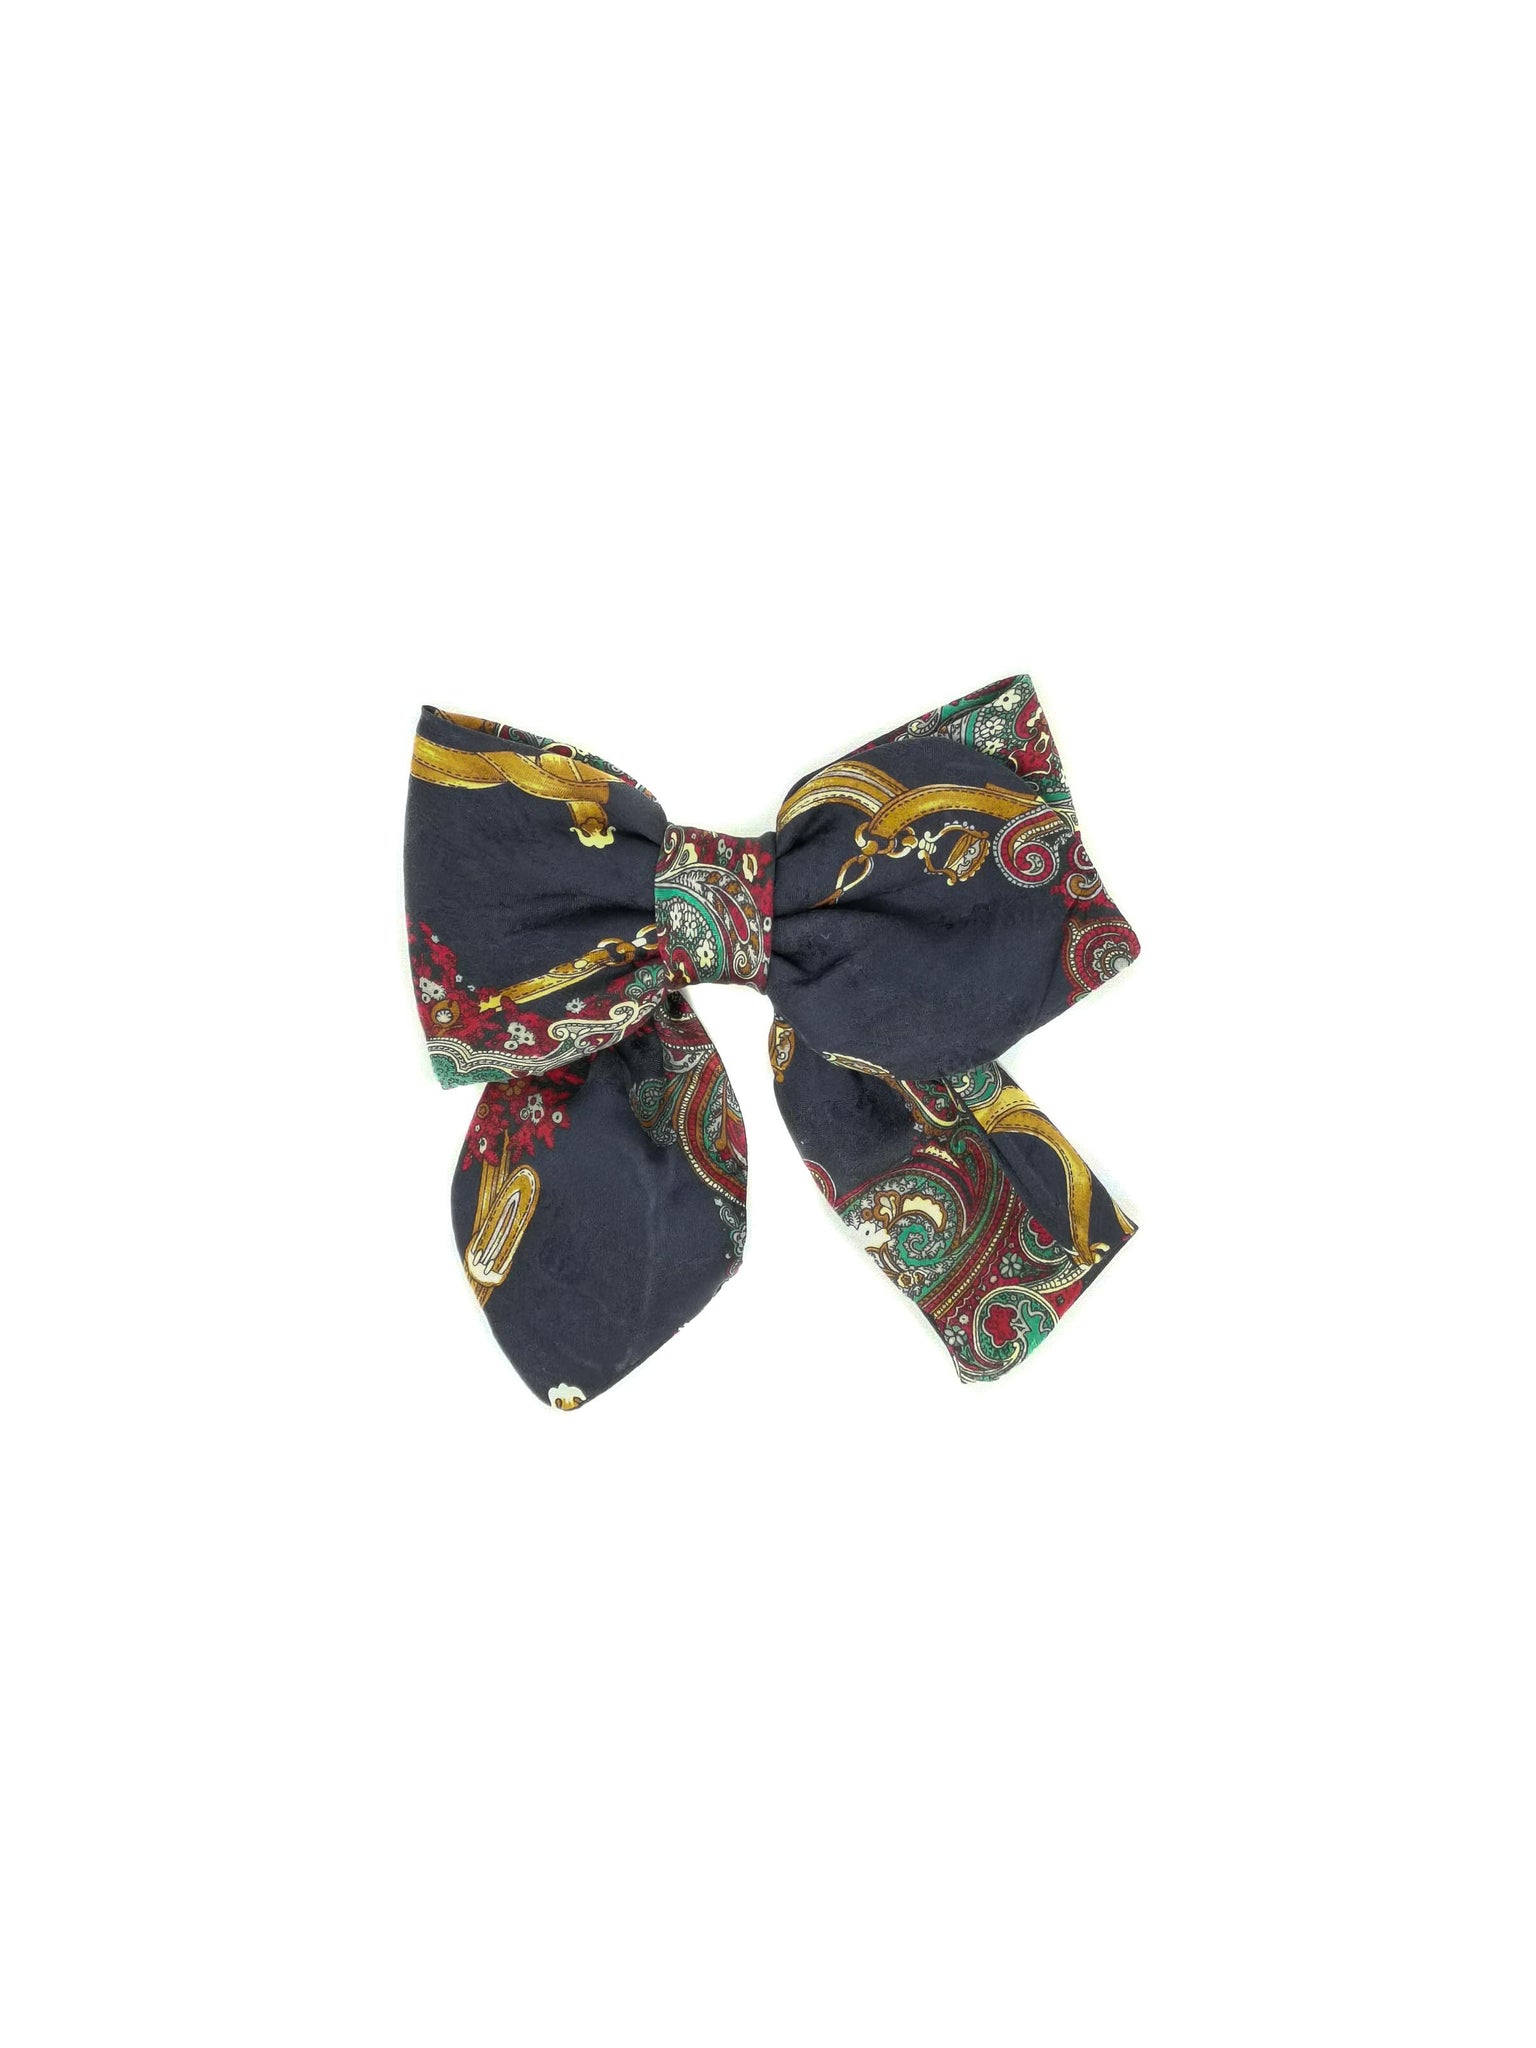 Paisley silk bow barrette made by vintage tie